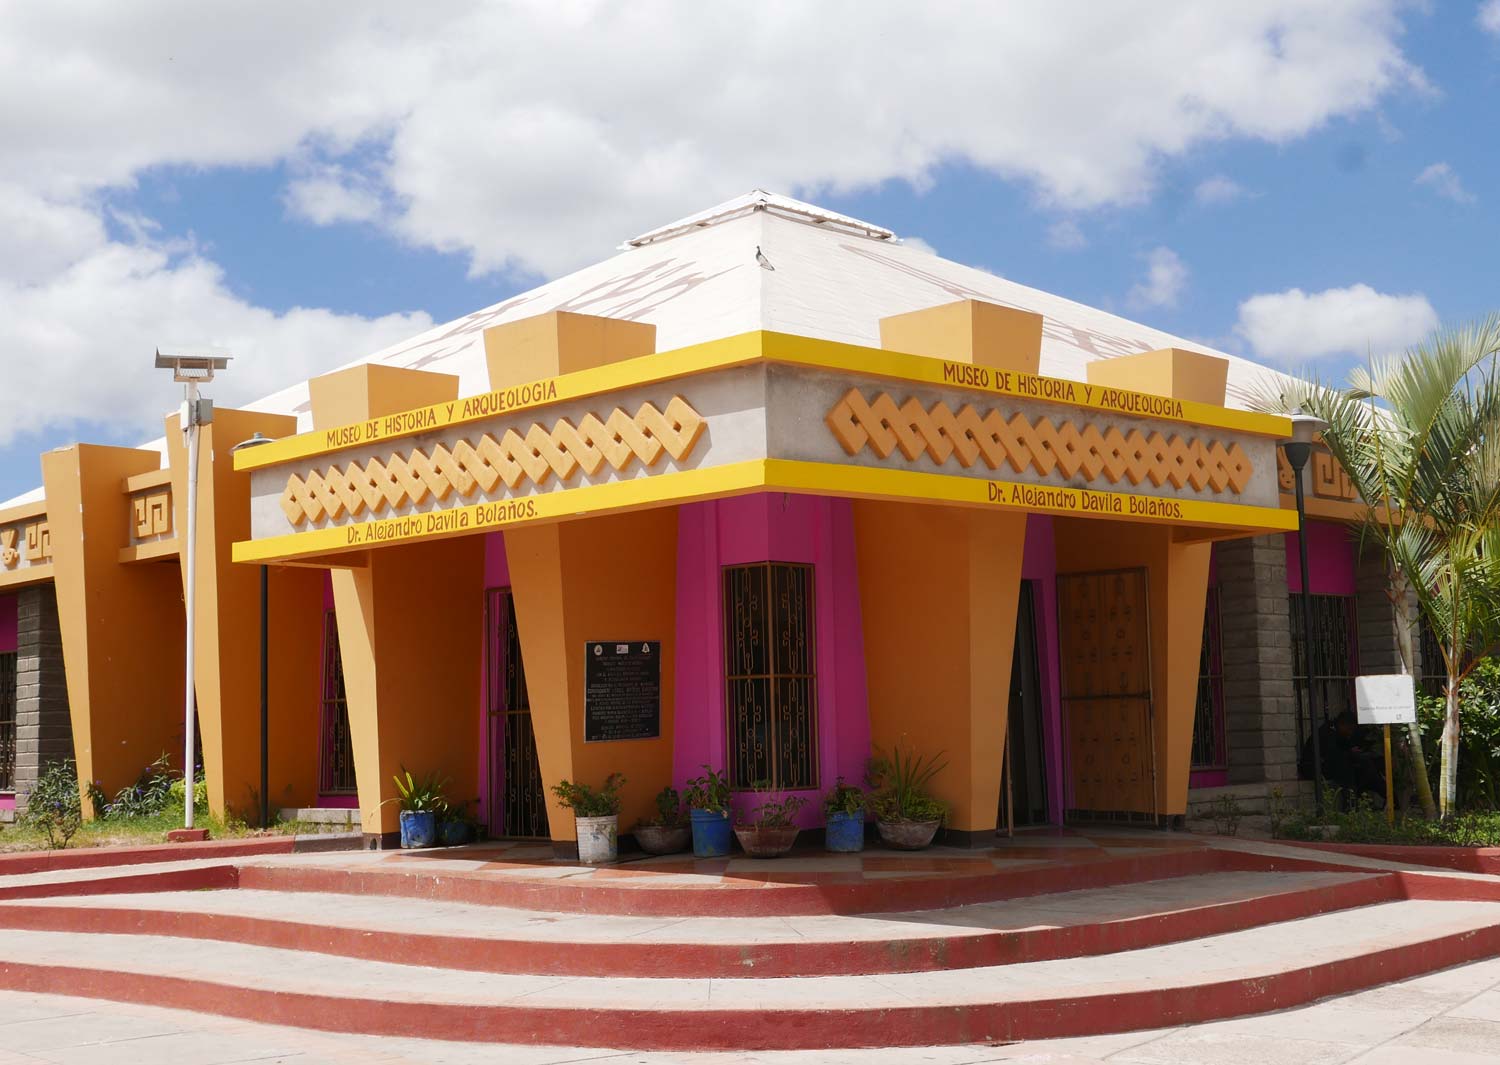 History and archeology museum in Esteli, Nicaragua